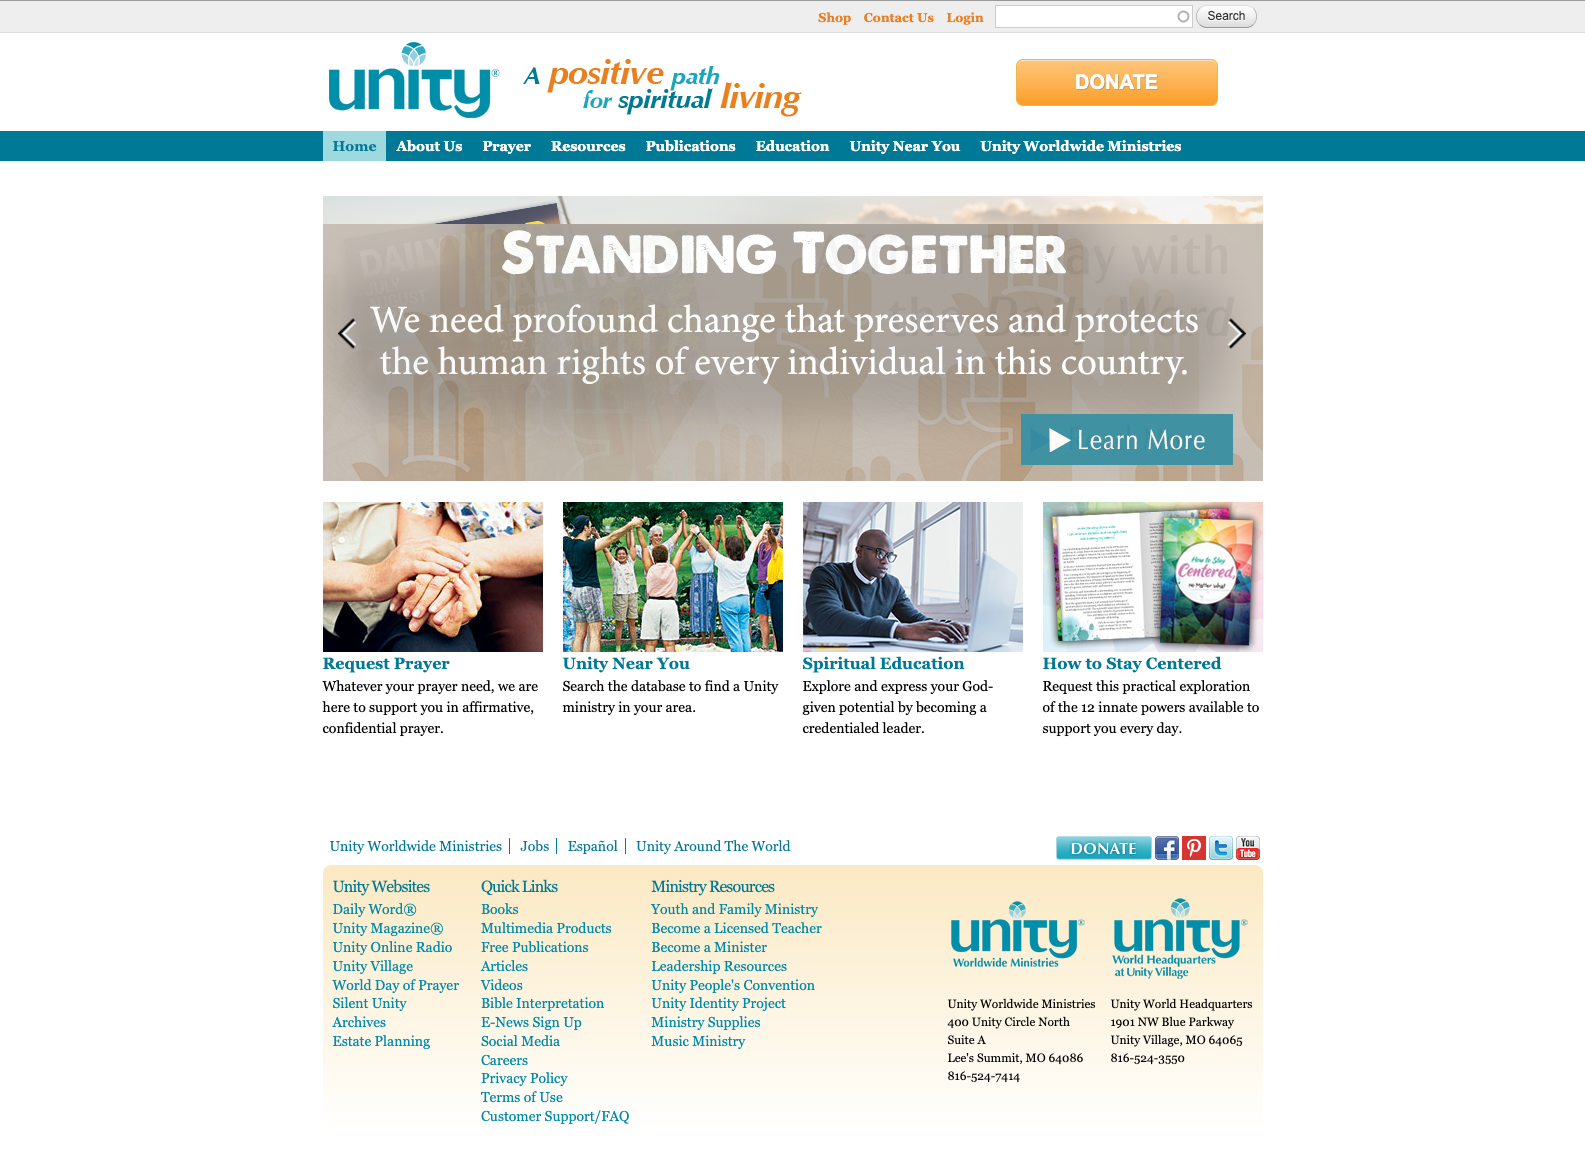 Unity Website Before the Redesign